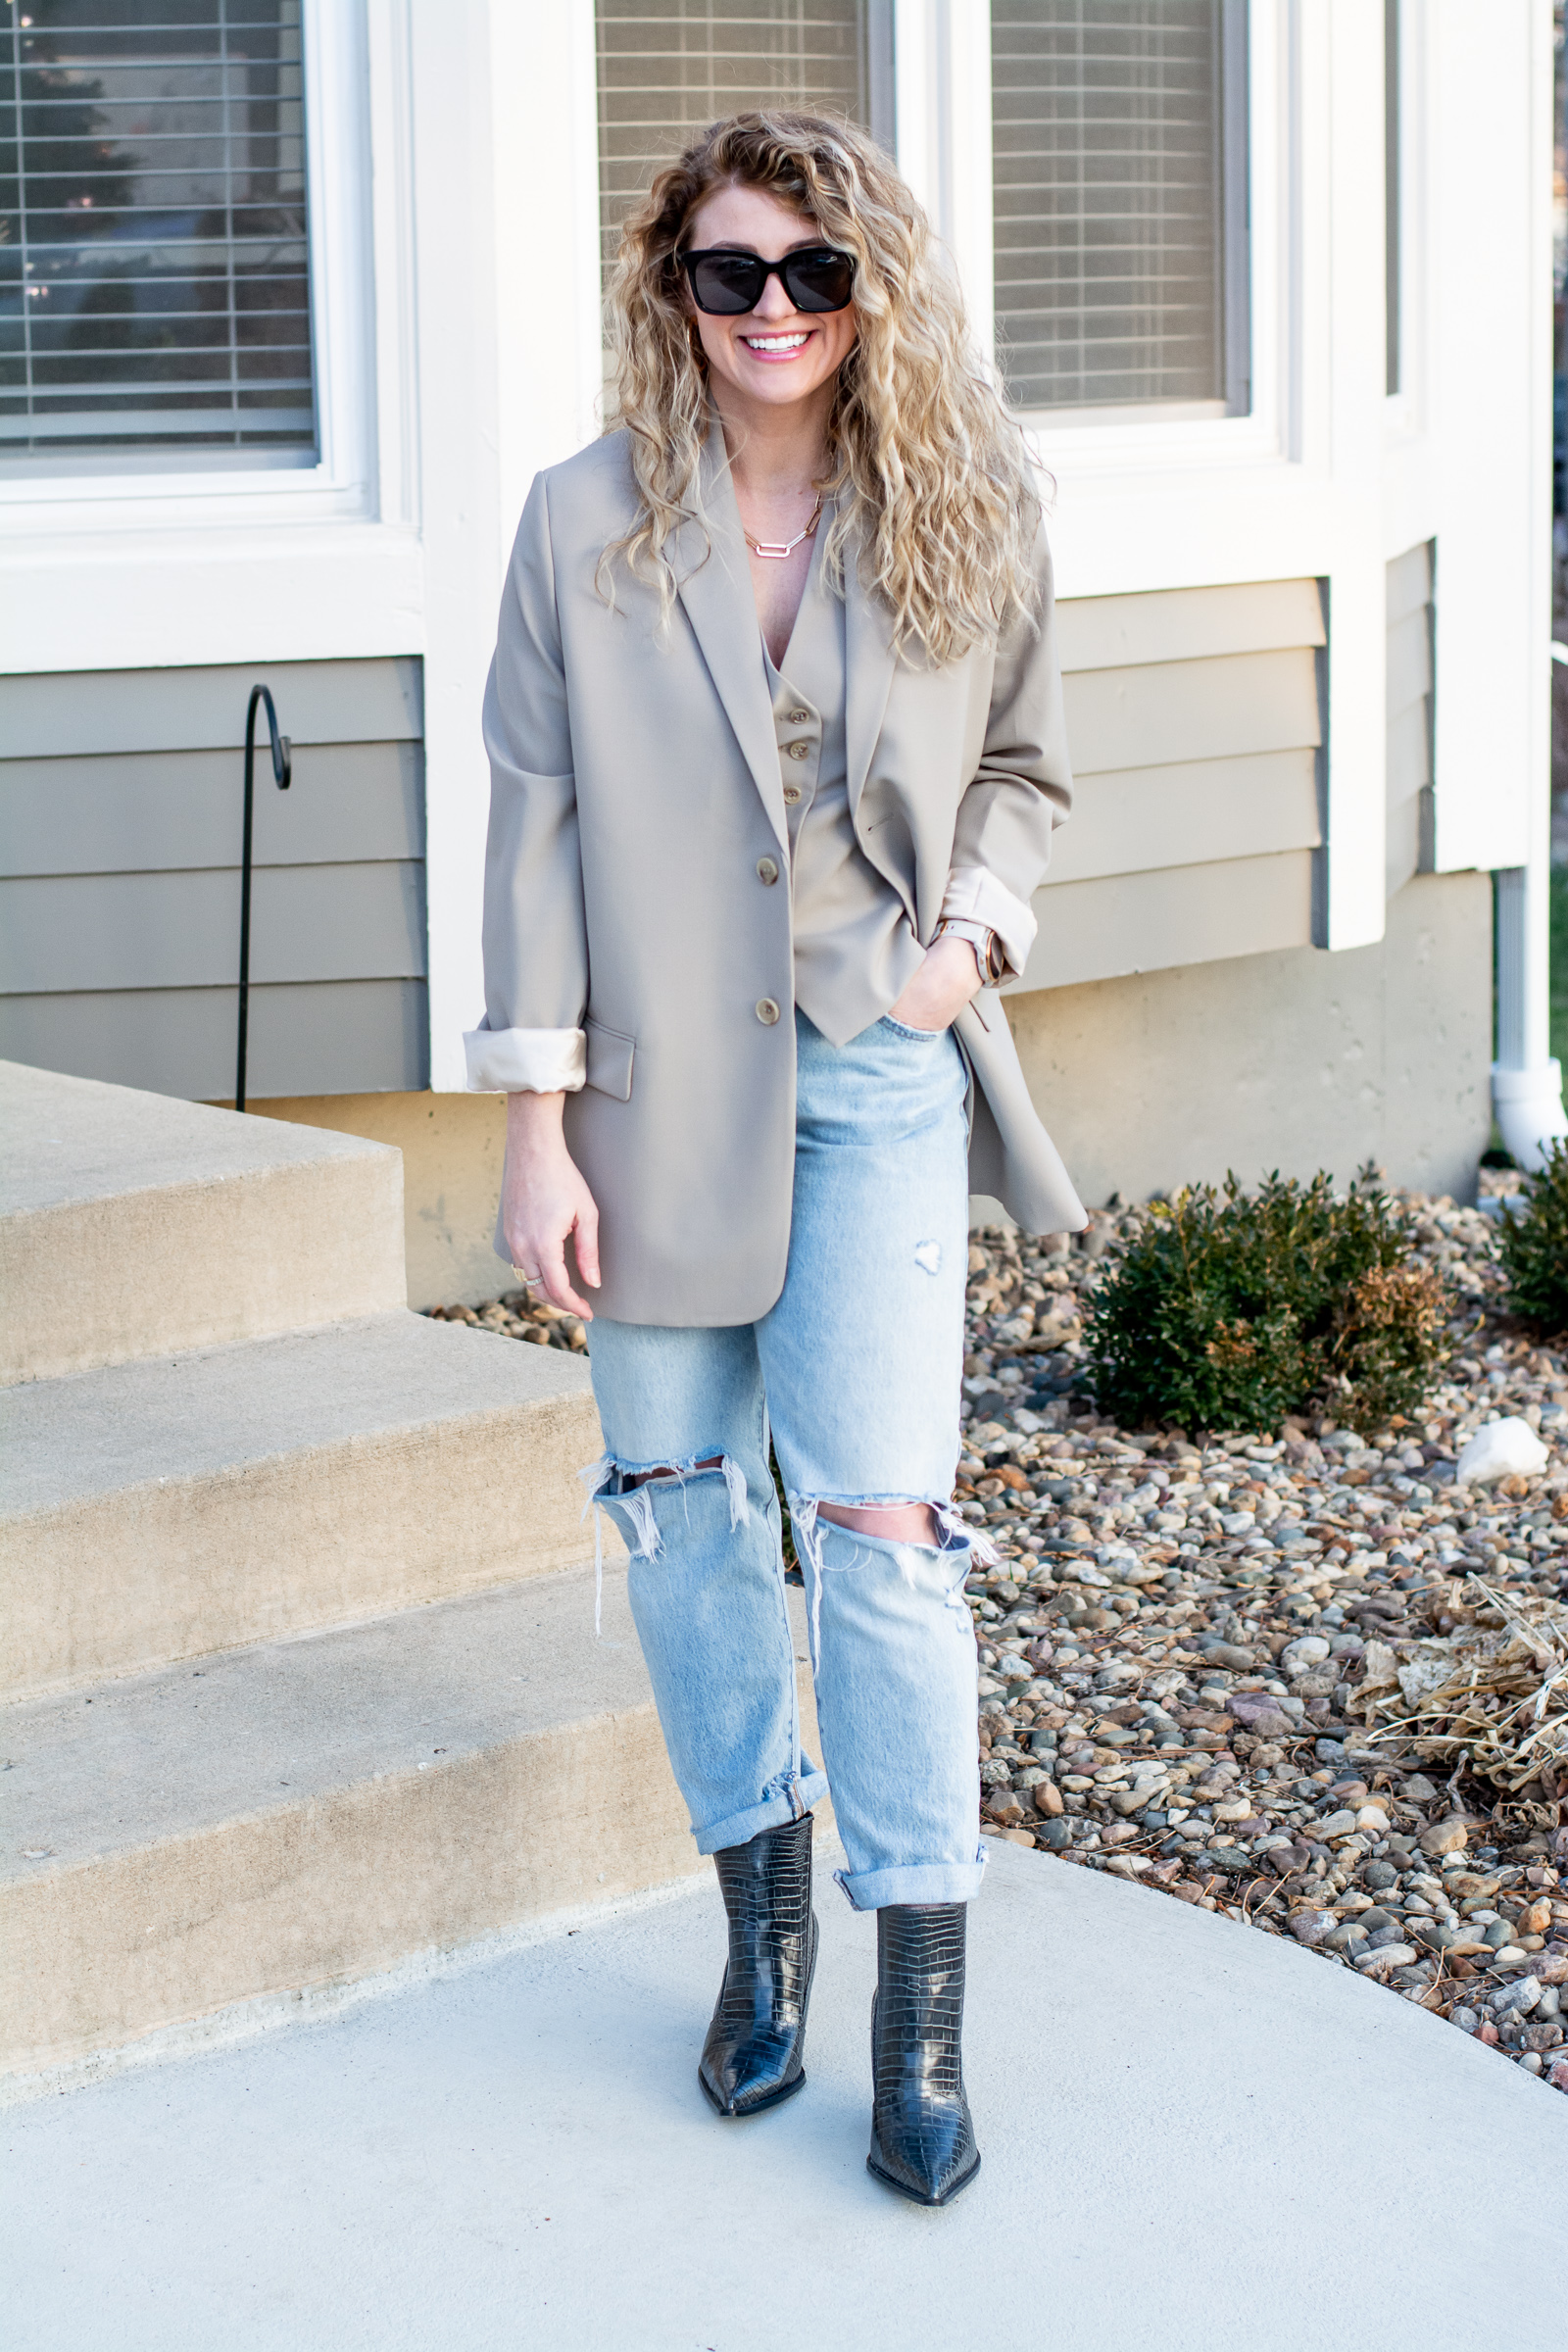 Outfit Idea: Matching Gray Blazer and Vest with Levi's. | LSR